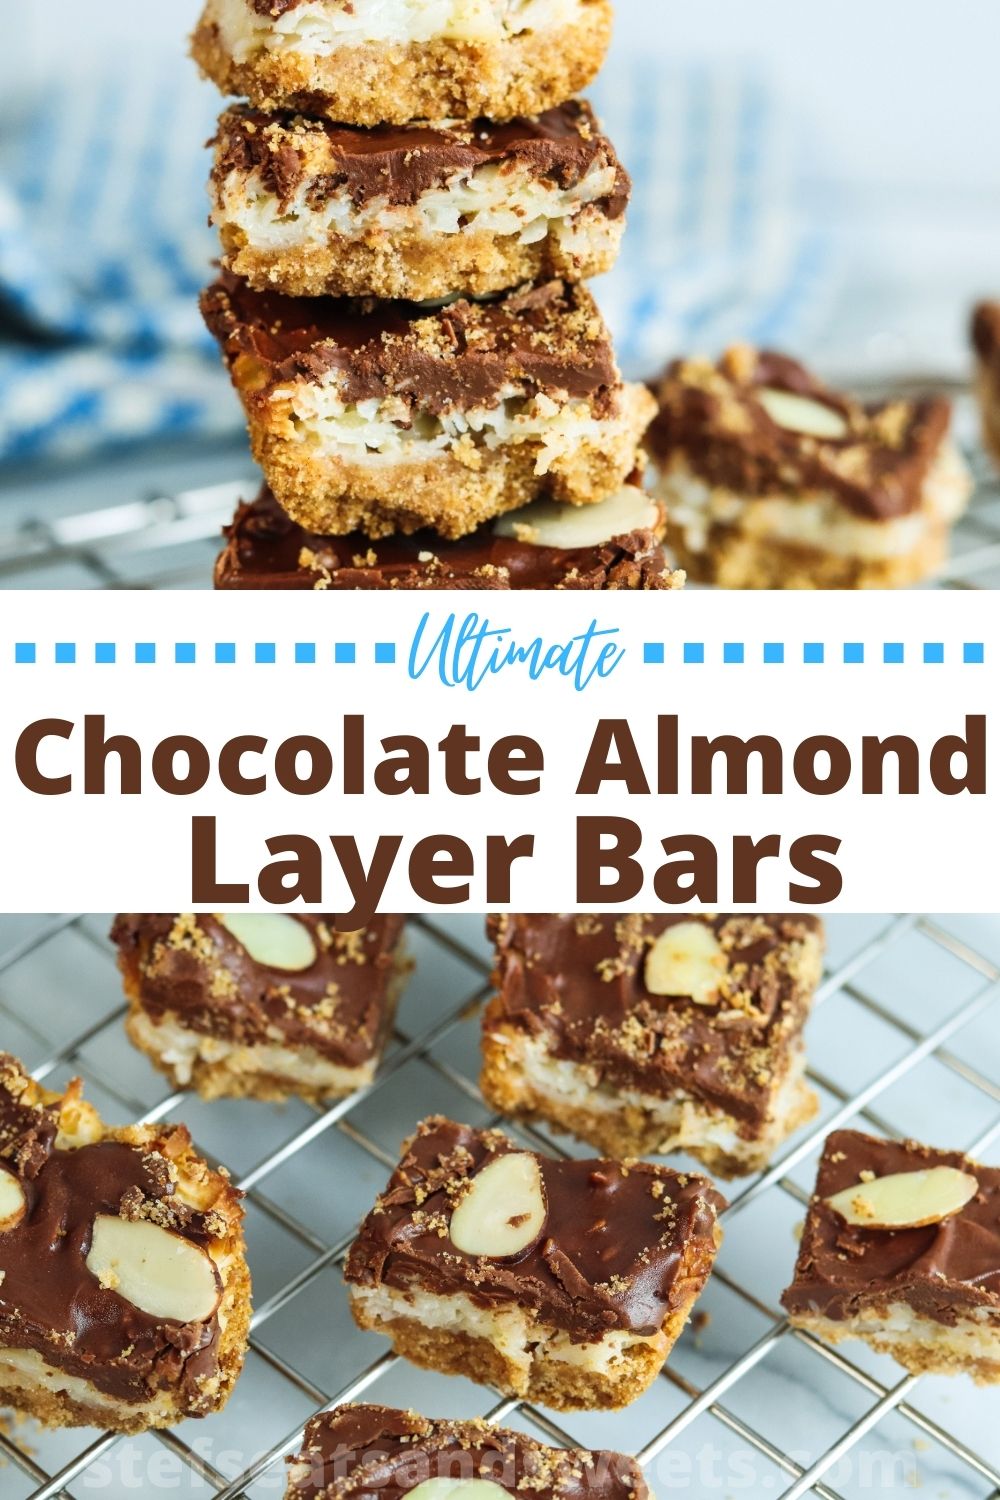 The Ultimate Chocolate Almond Layer Bars